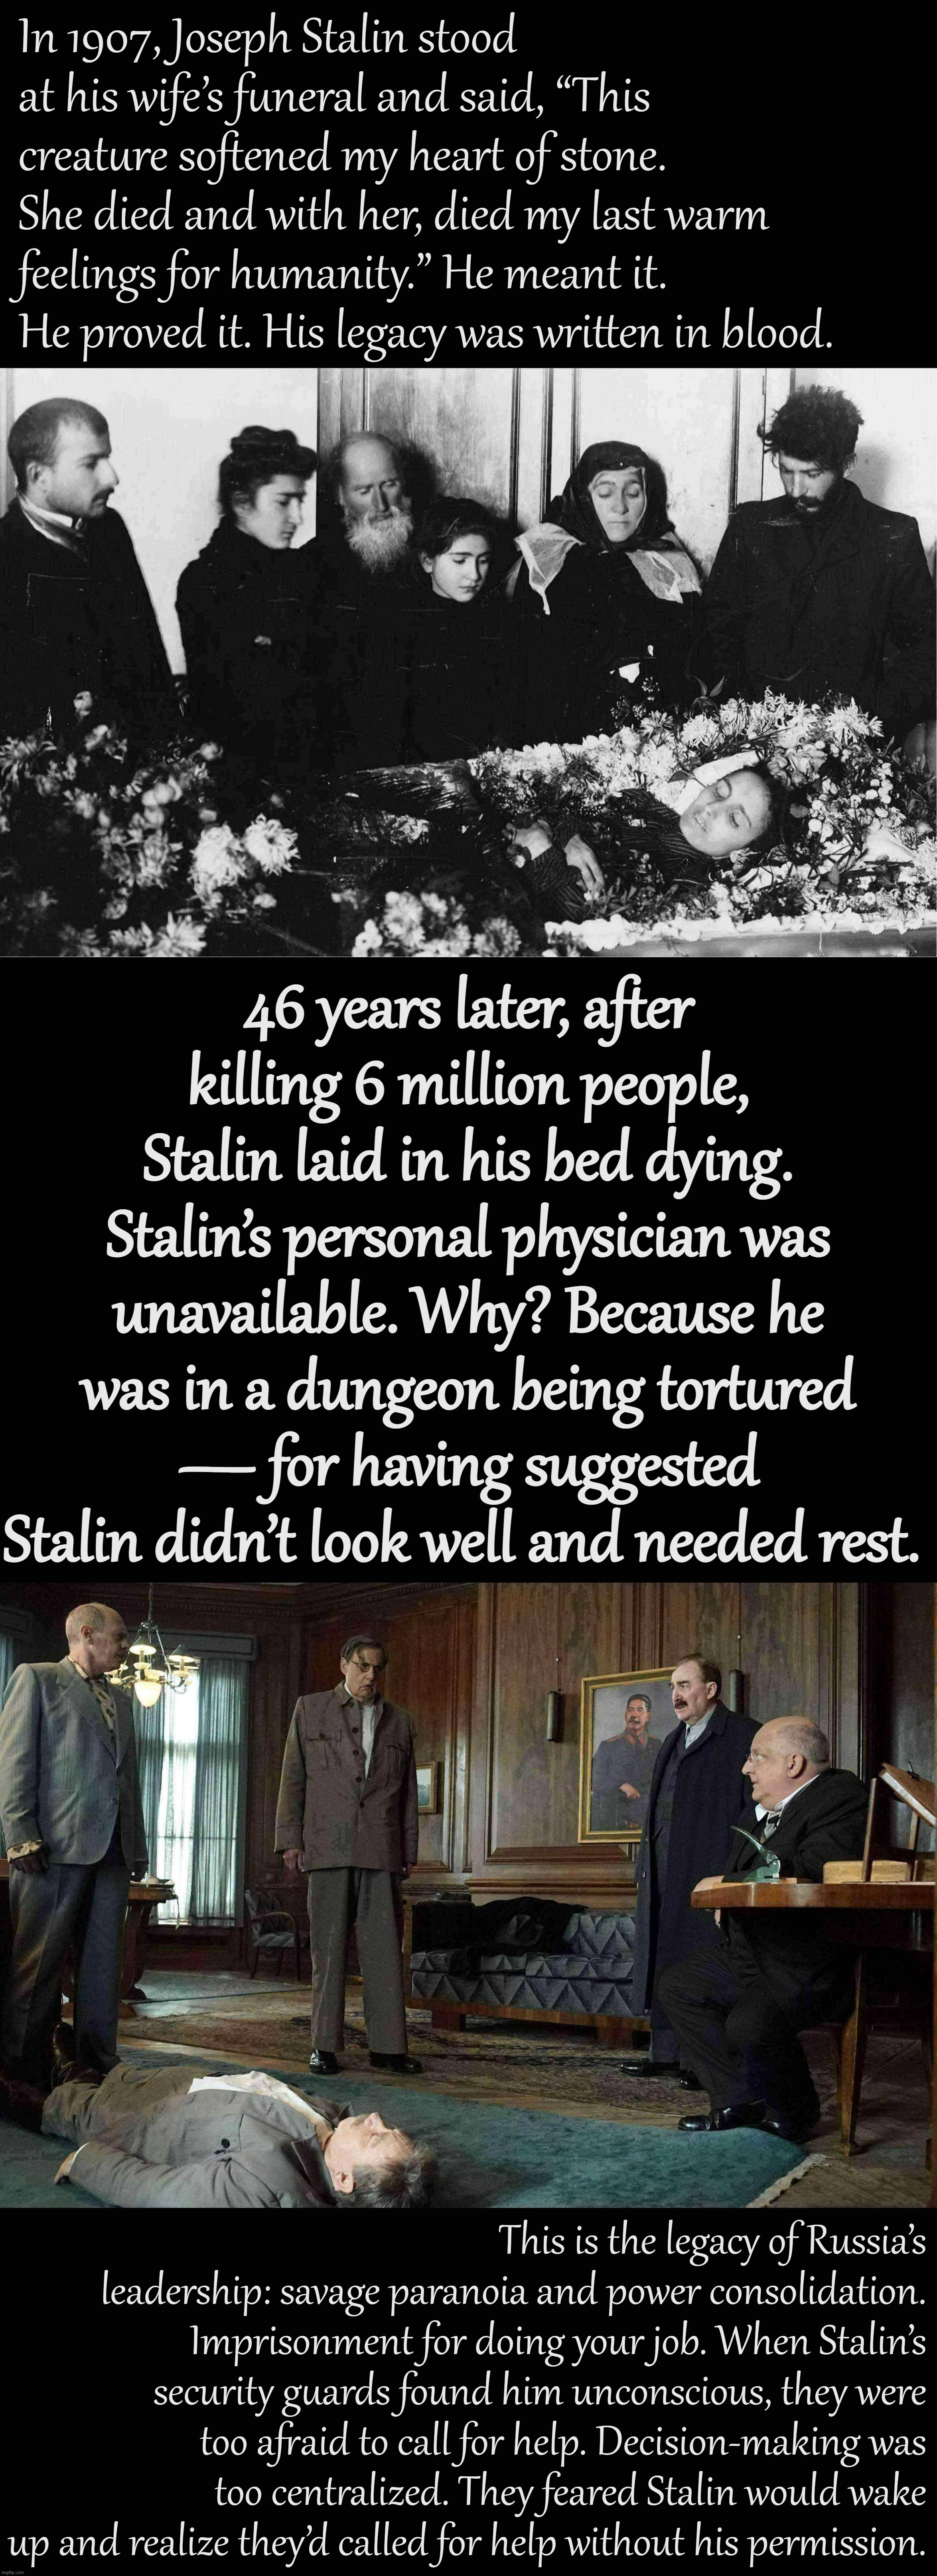 Stalin died how he lived. |  In 1907, Joseph Stalin stood at his wife’s funeral and said, “This creature softened my heart of stone. She died and with her, died my last warm feelings for humanity.” He meant it. He proved it. His legacy was written in blood. 46 years later, after killing 6 million people, Stalin laid in his bed dying. Stalin’s personal physician was unavailable. Why? Because he was in a dungeon being tortured — for having suggested Stalin didn’t look well and needed rest. This is the legacy of Russia’s leadership: savage paranoia and power consolidation. Imprisonment for doing your job. When Stalin’s security guards found him unconscious, they were too afraid to call for help. Decision-making was too centralized. They feared Stalin would wake up and realize they’d called for help without his permission. | image tagged in stalin at wife's funeral 1907,death of stalin,stalin,joseph stalin,russia,in soviet russia | made w/ Imgflip meme maker